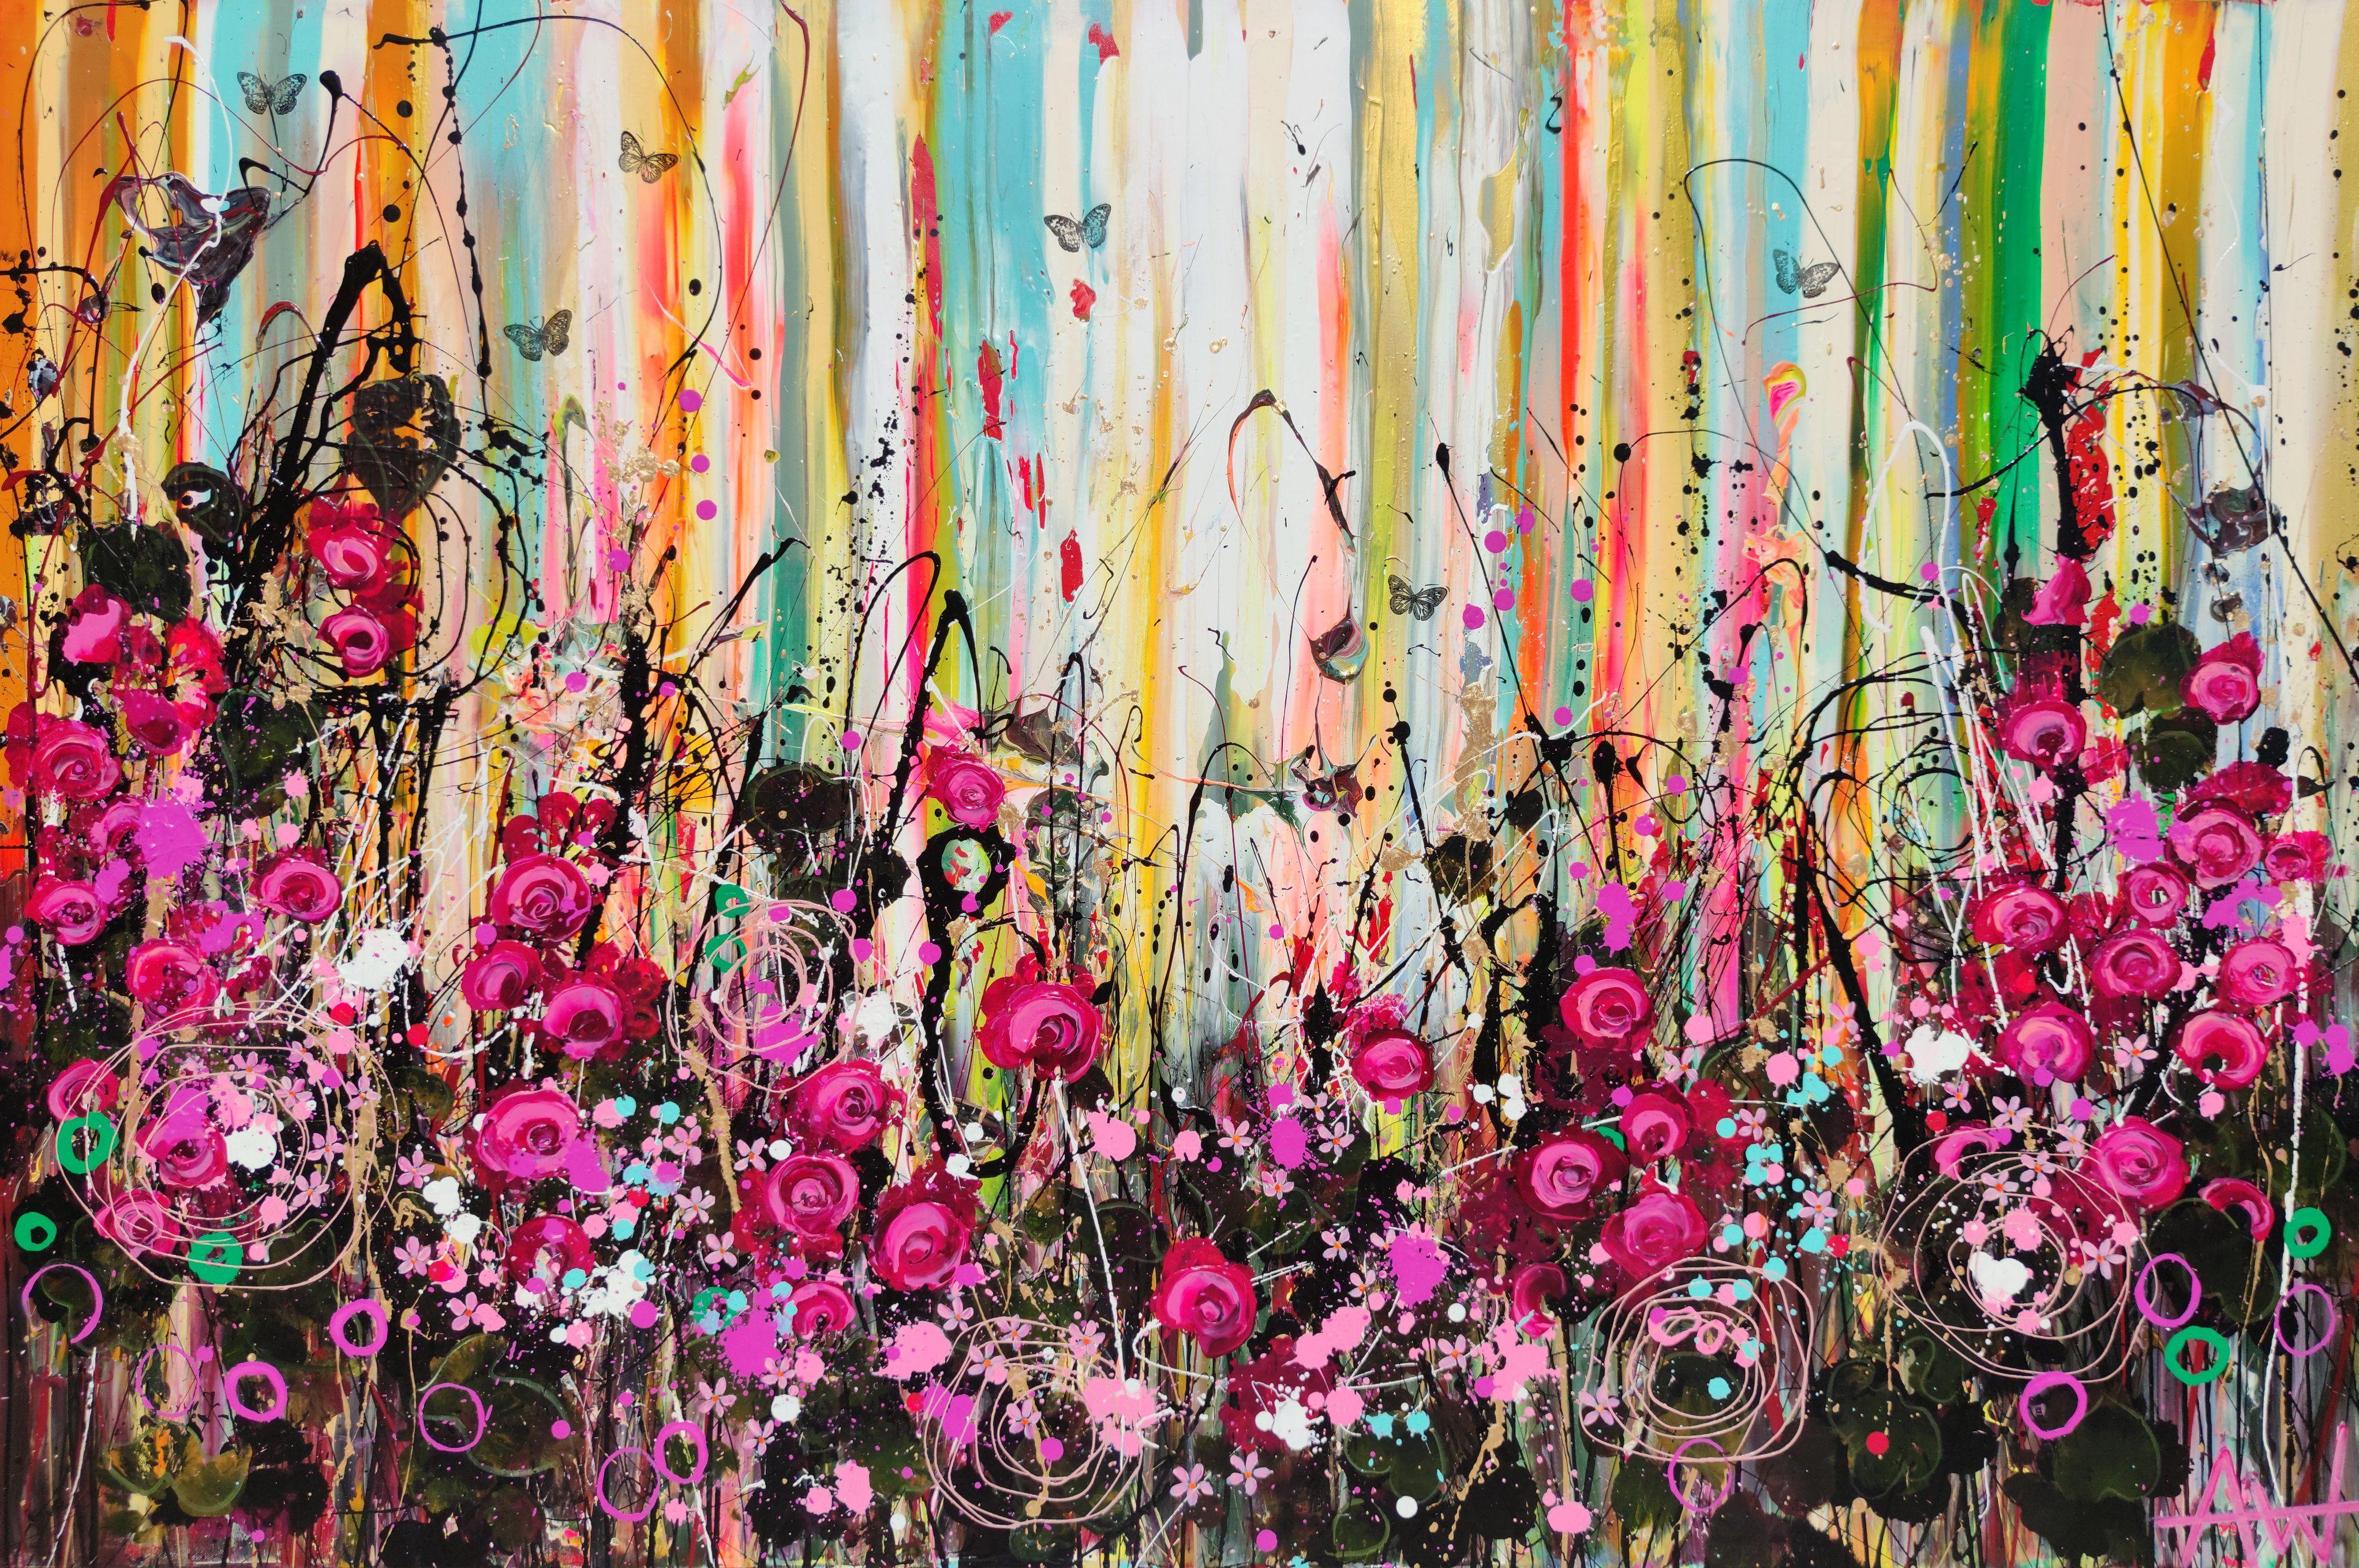 Beautiful Chaos, oil and acrylic on canvas, 150 x 100 x 3 cm  The beautiful imperfect. Inspired by the Japanese perspective of Wabi - Sabi which sees beauty in transient imperfection I wanted to create a painting full of raw grace. When flowers